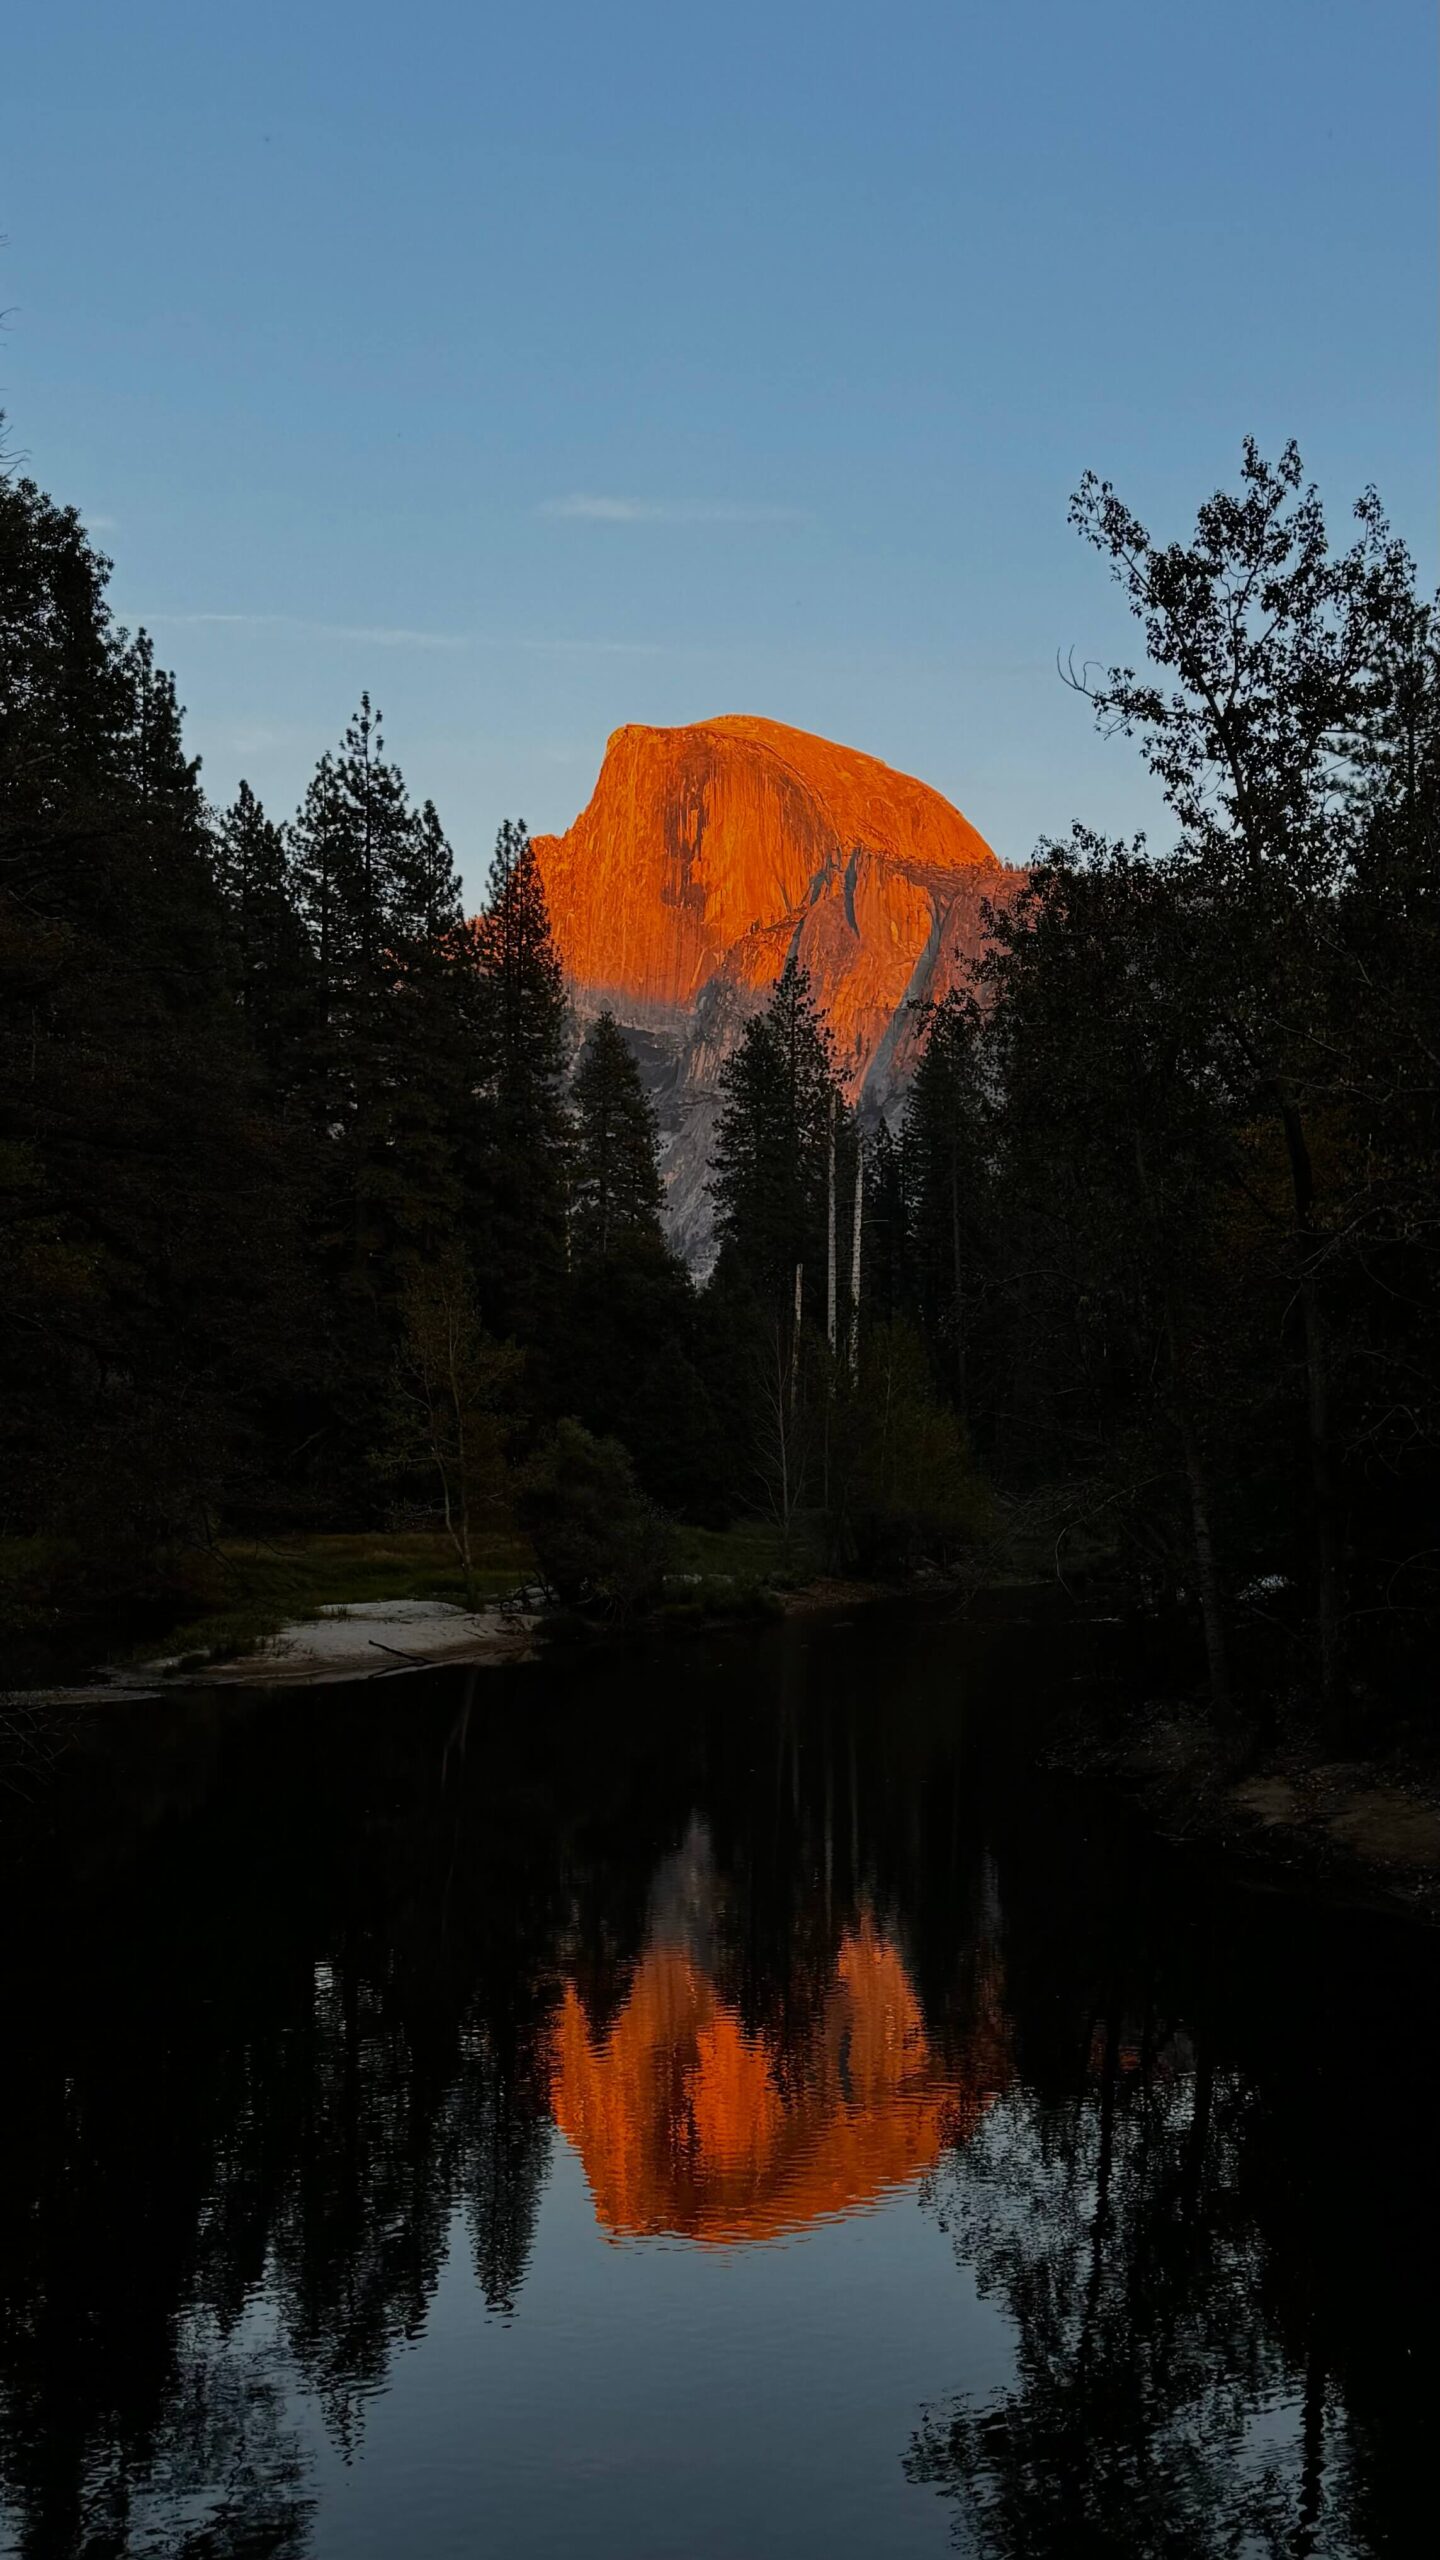 A striking orange sunset illuminates the peak of Half Dome in Yosemite National Park, framed by tall trees. The clear, still water below mirrors the vibrant rock formation against a deepening blue sky.